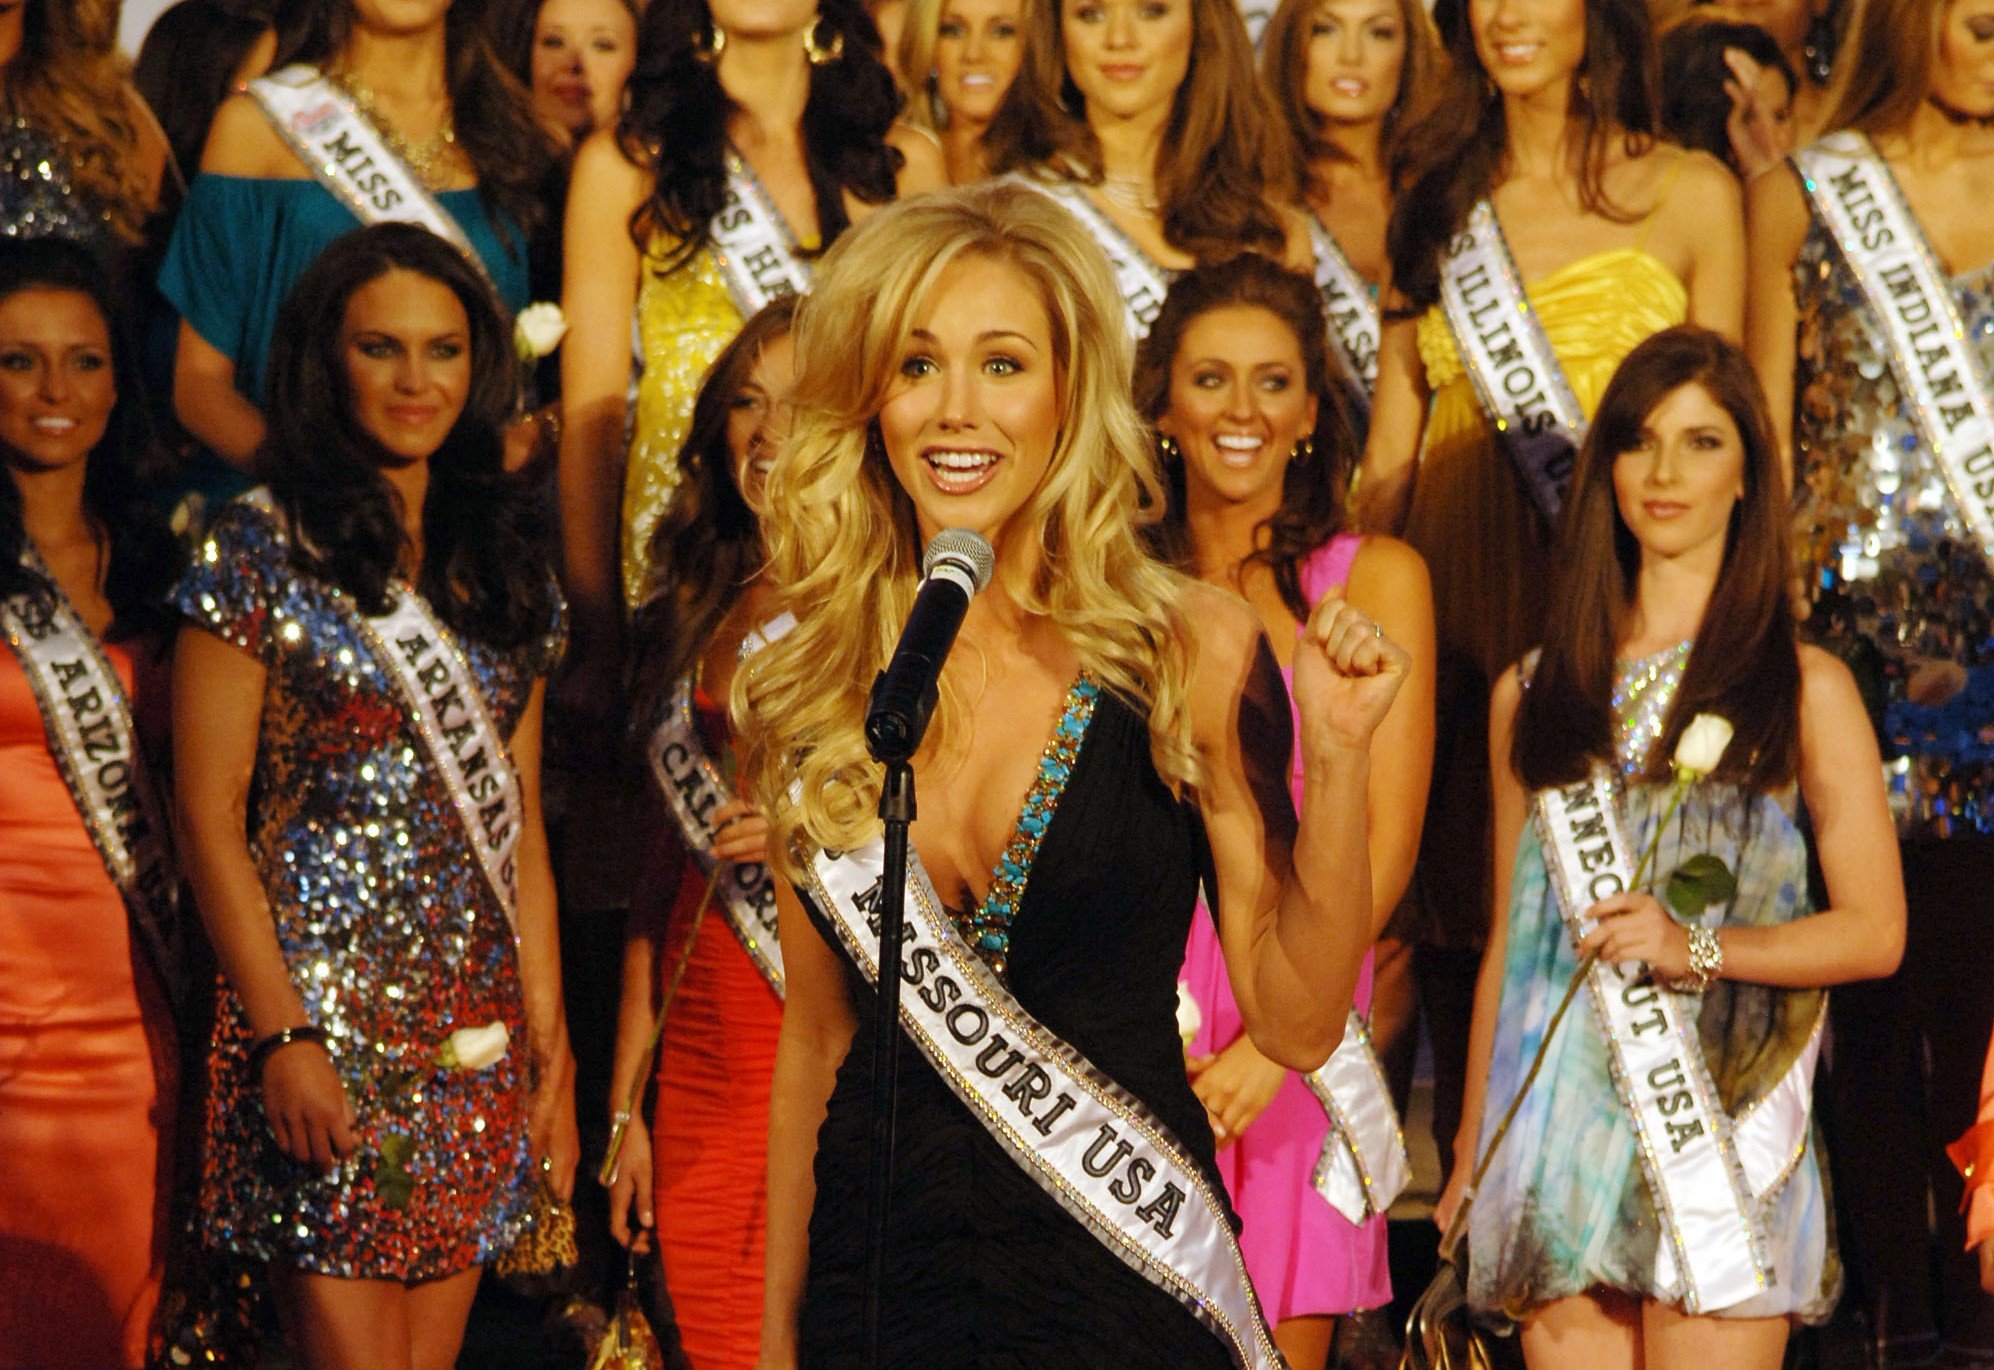 Miss Missouri Candice Crawford arrives at Planet Hollywood Resort & Casino on March 27, 2008 in Las Vegas, Nevada. | Source: Getty Images